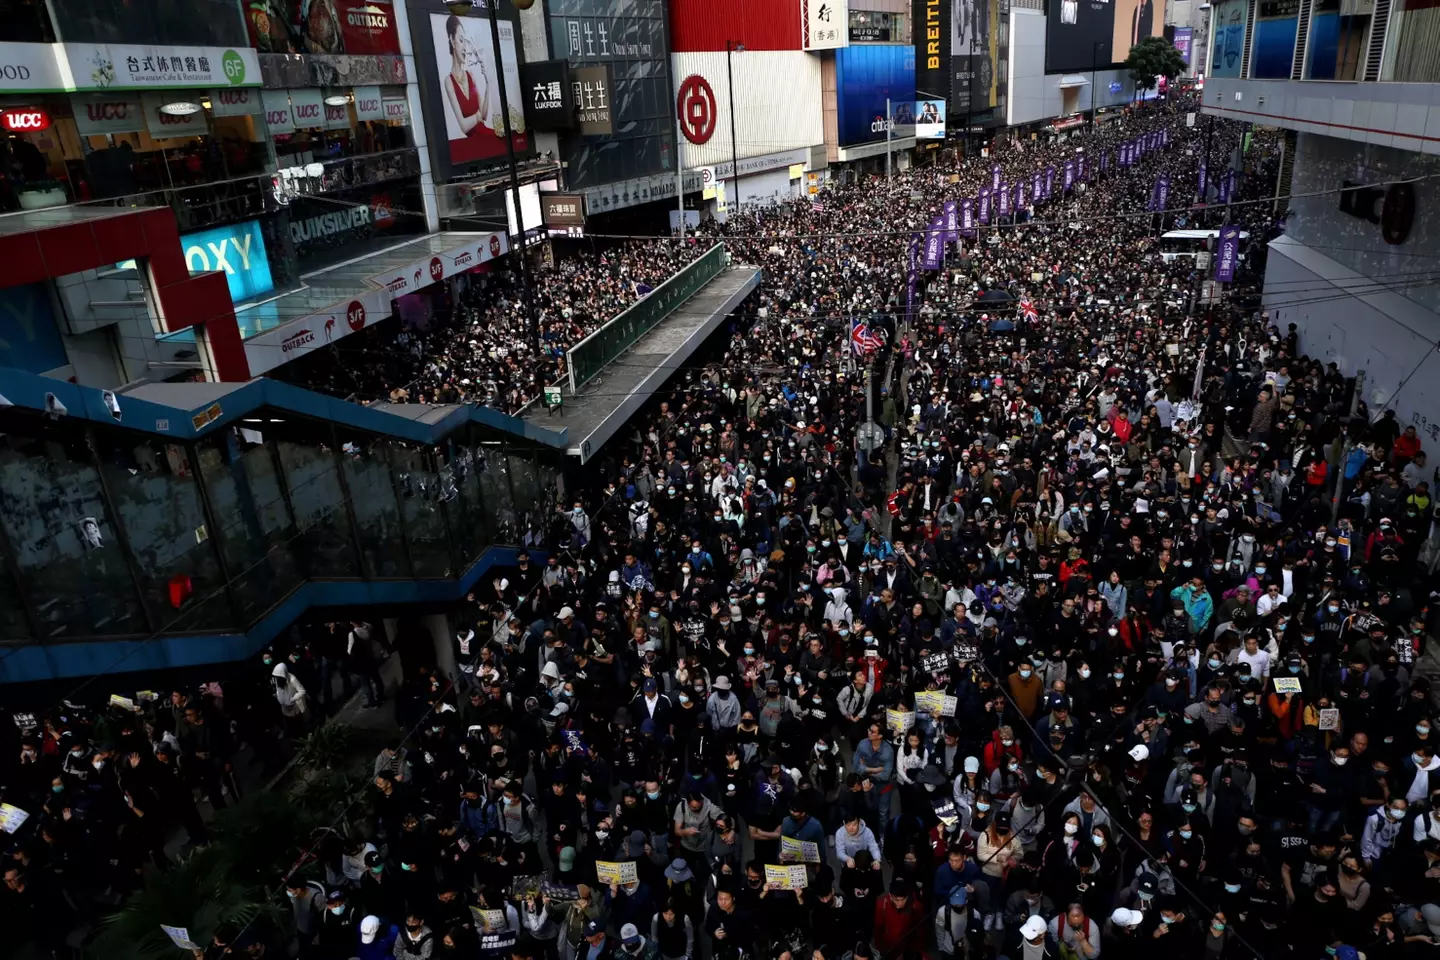 Massive numbers of pro-democracy supporters have demonstrated on the streets of Hong Kong.